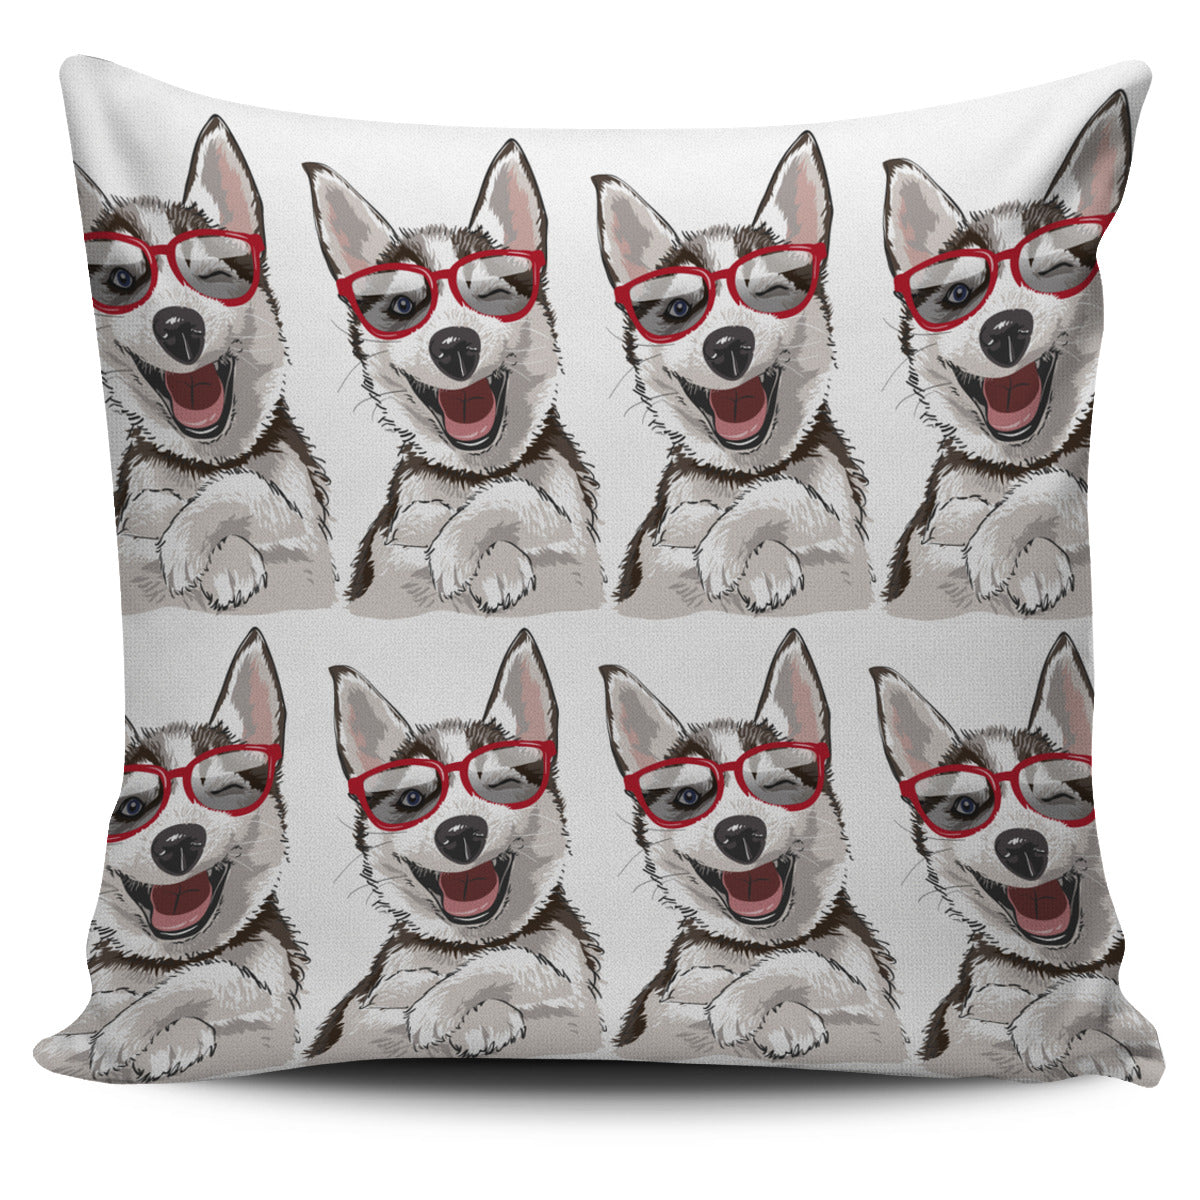 Laughing Dog Pillow Cover